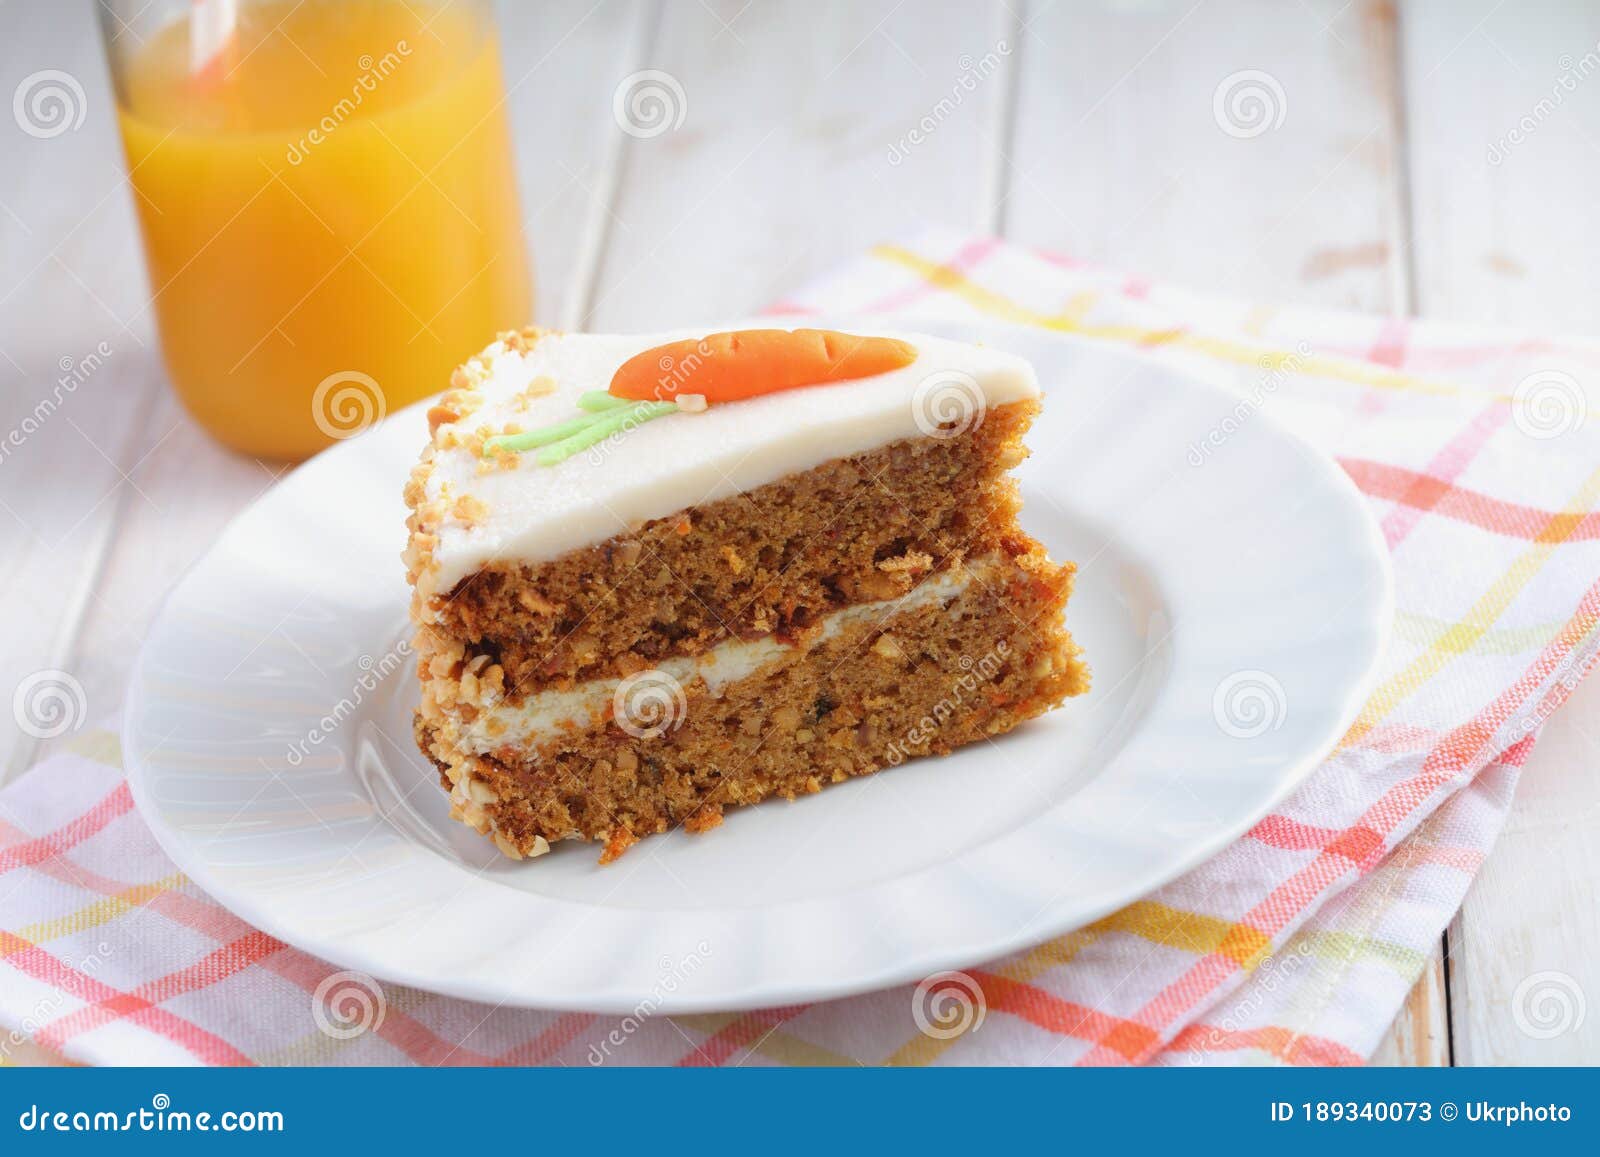 slice of carrot cake  pastel de zanahoria with icing and marzipan carrot on white background with carrot juice